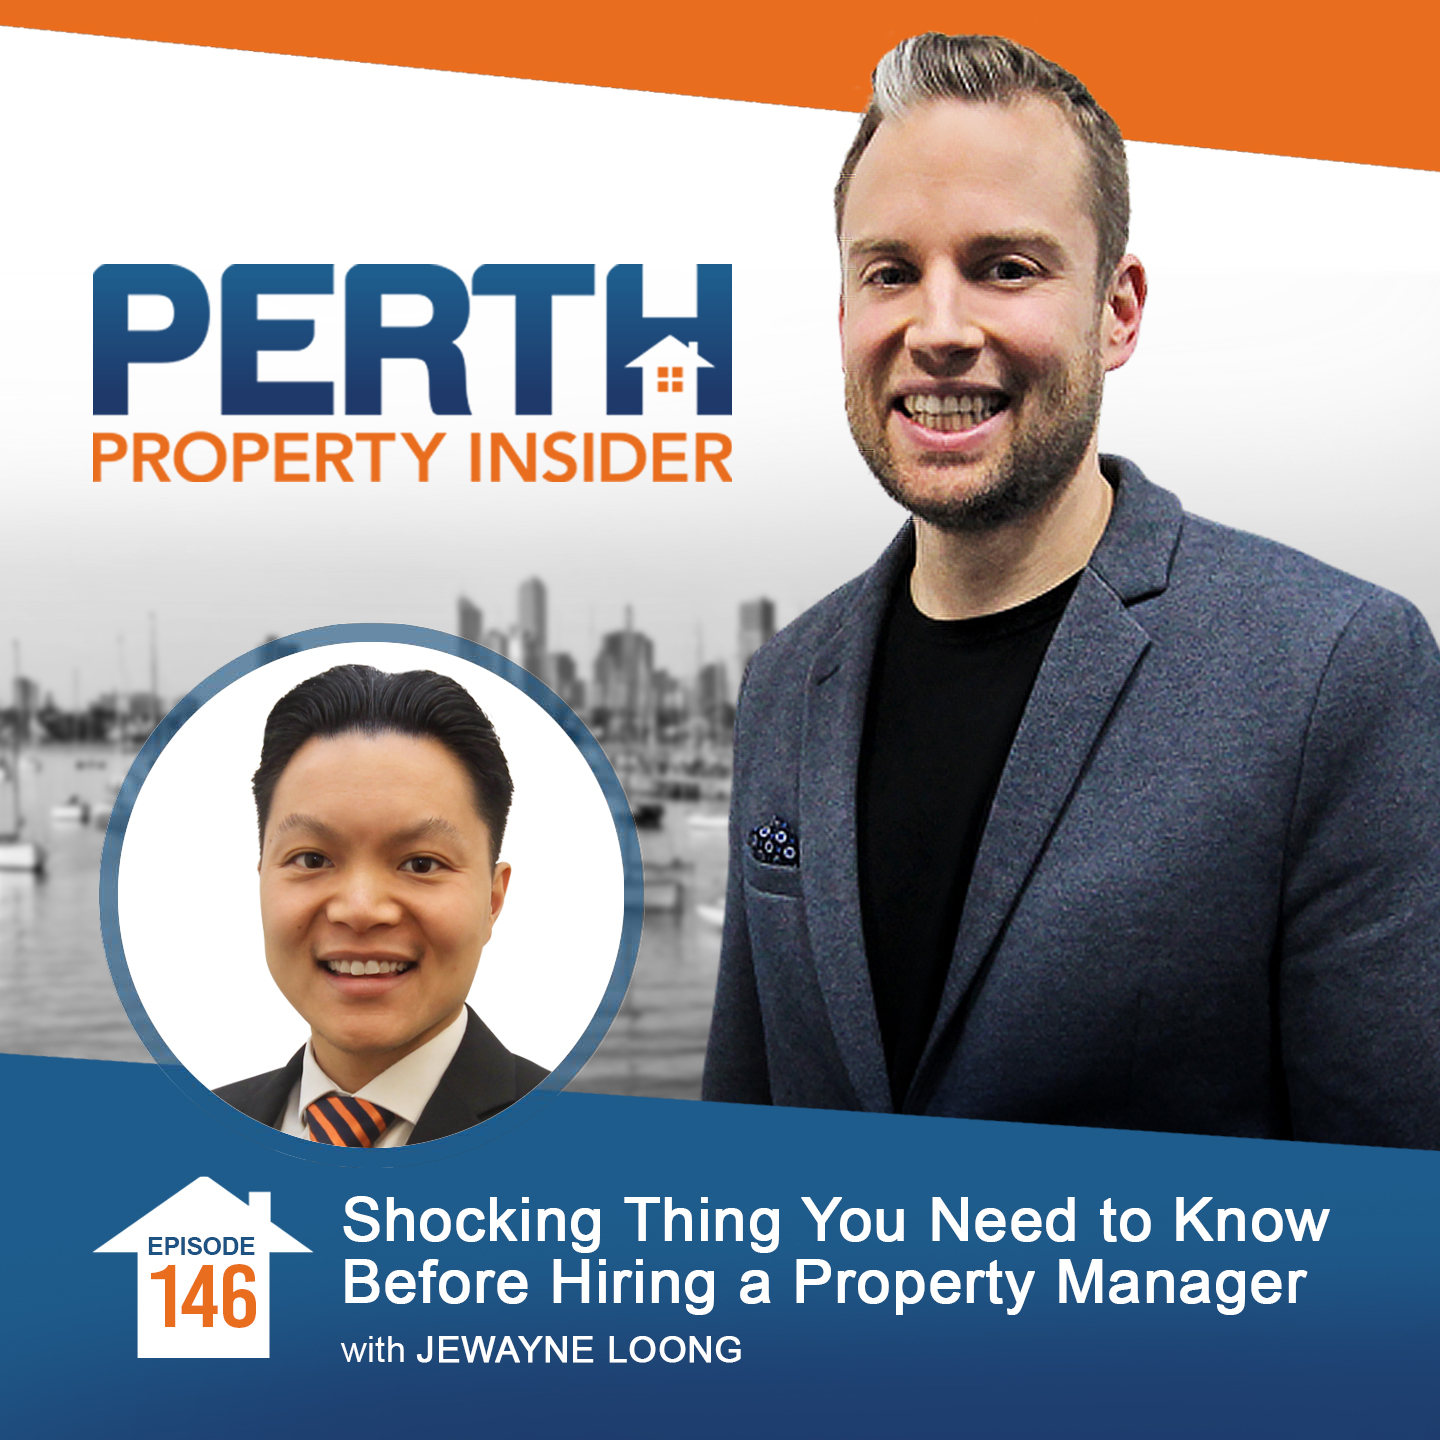 Shocking Things You Need to Know Before Hiring a Property Manager with Jewayne Loong